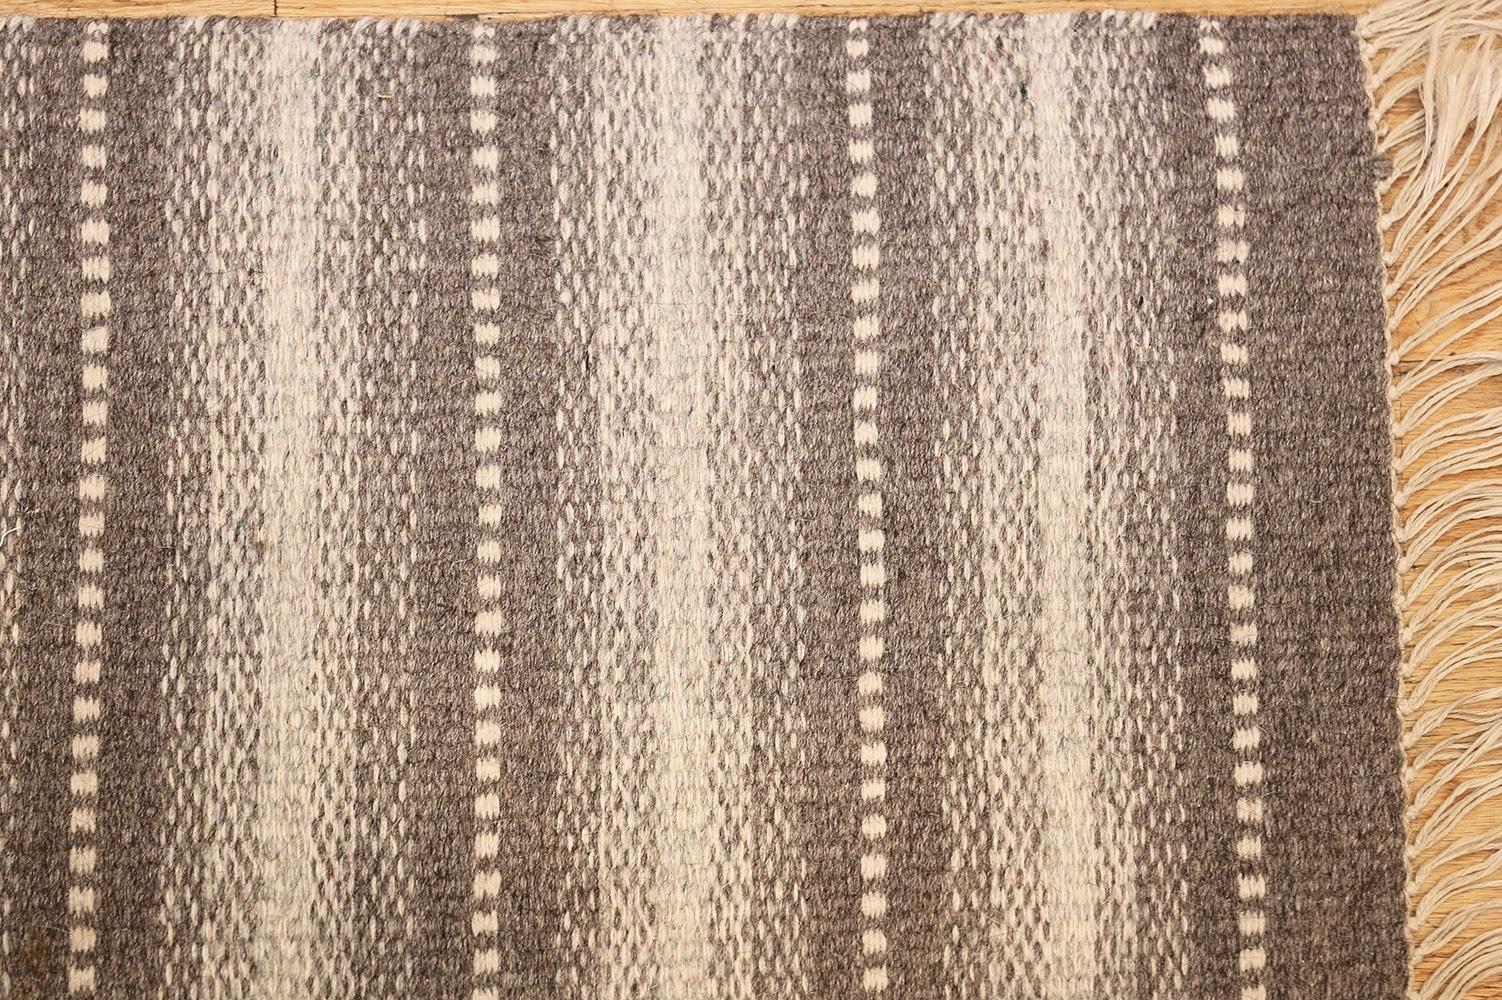 Vintage Kilim, Sweden, mid-20th century. Size: 4 ft 6 in x 6 ft 8 in (1.37 m x 2.03 m)

